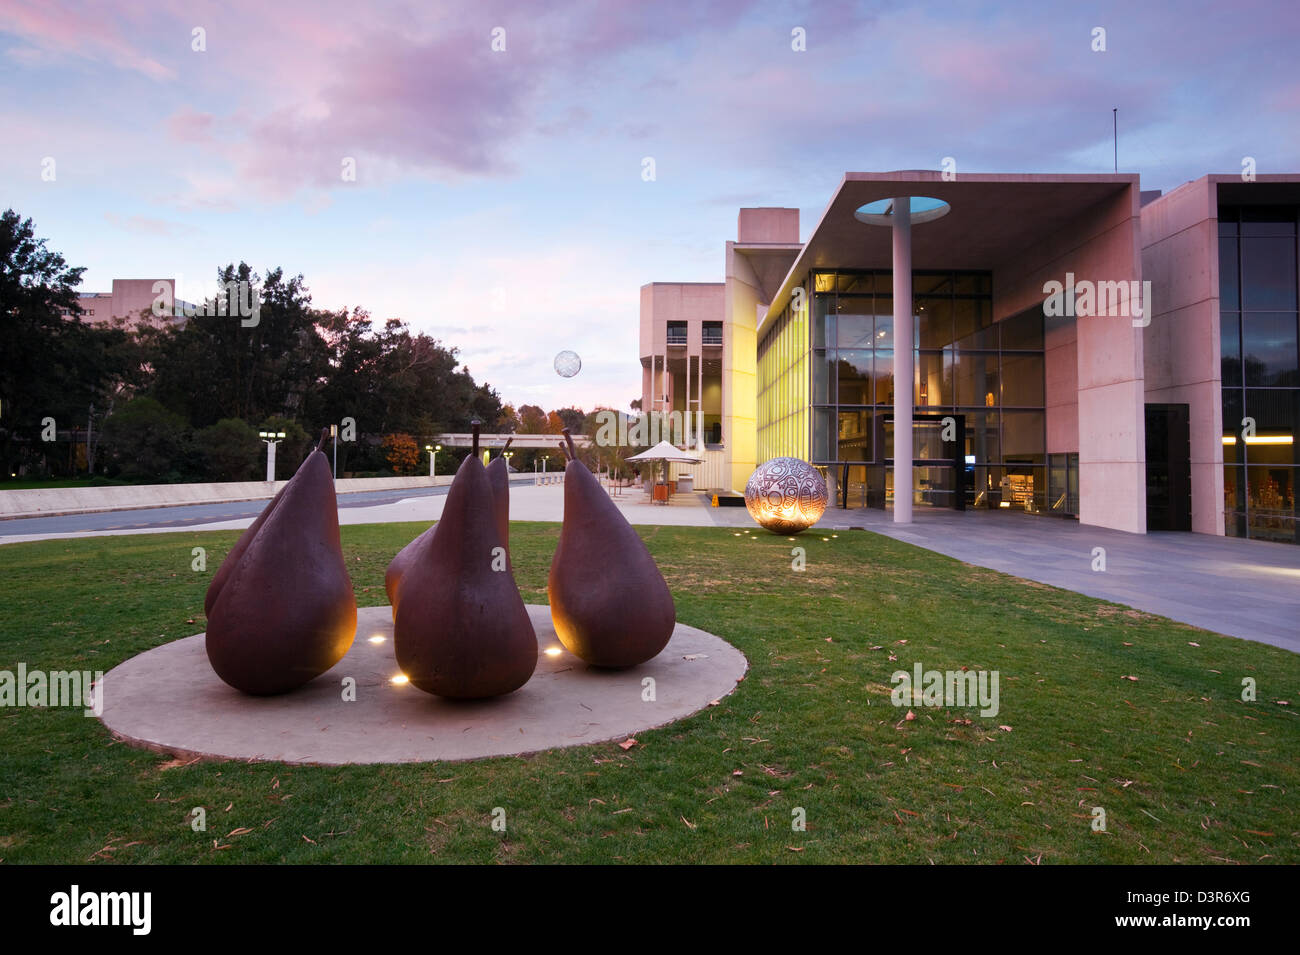 Pears sculpture by George Baldessin and the National Gallery of Australia. Canberra, Australian Capital Territory, Australia Stock Photo